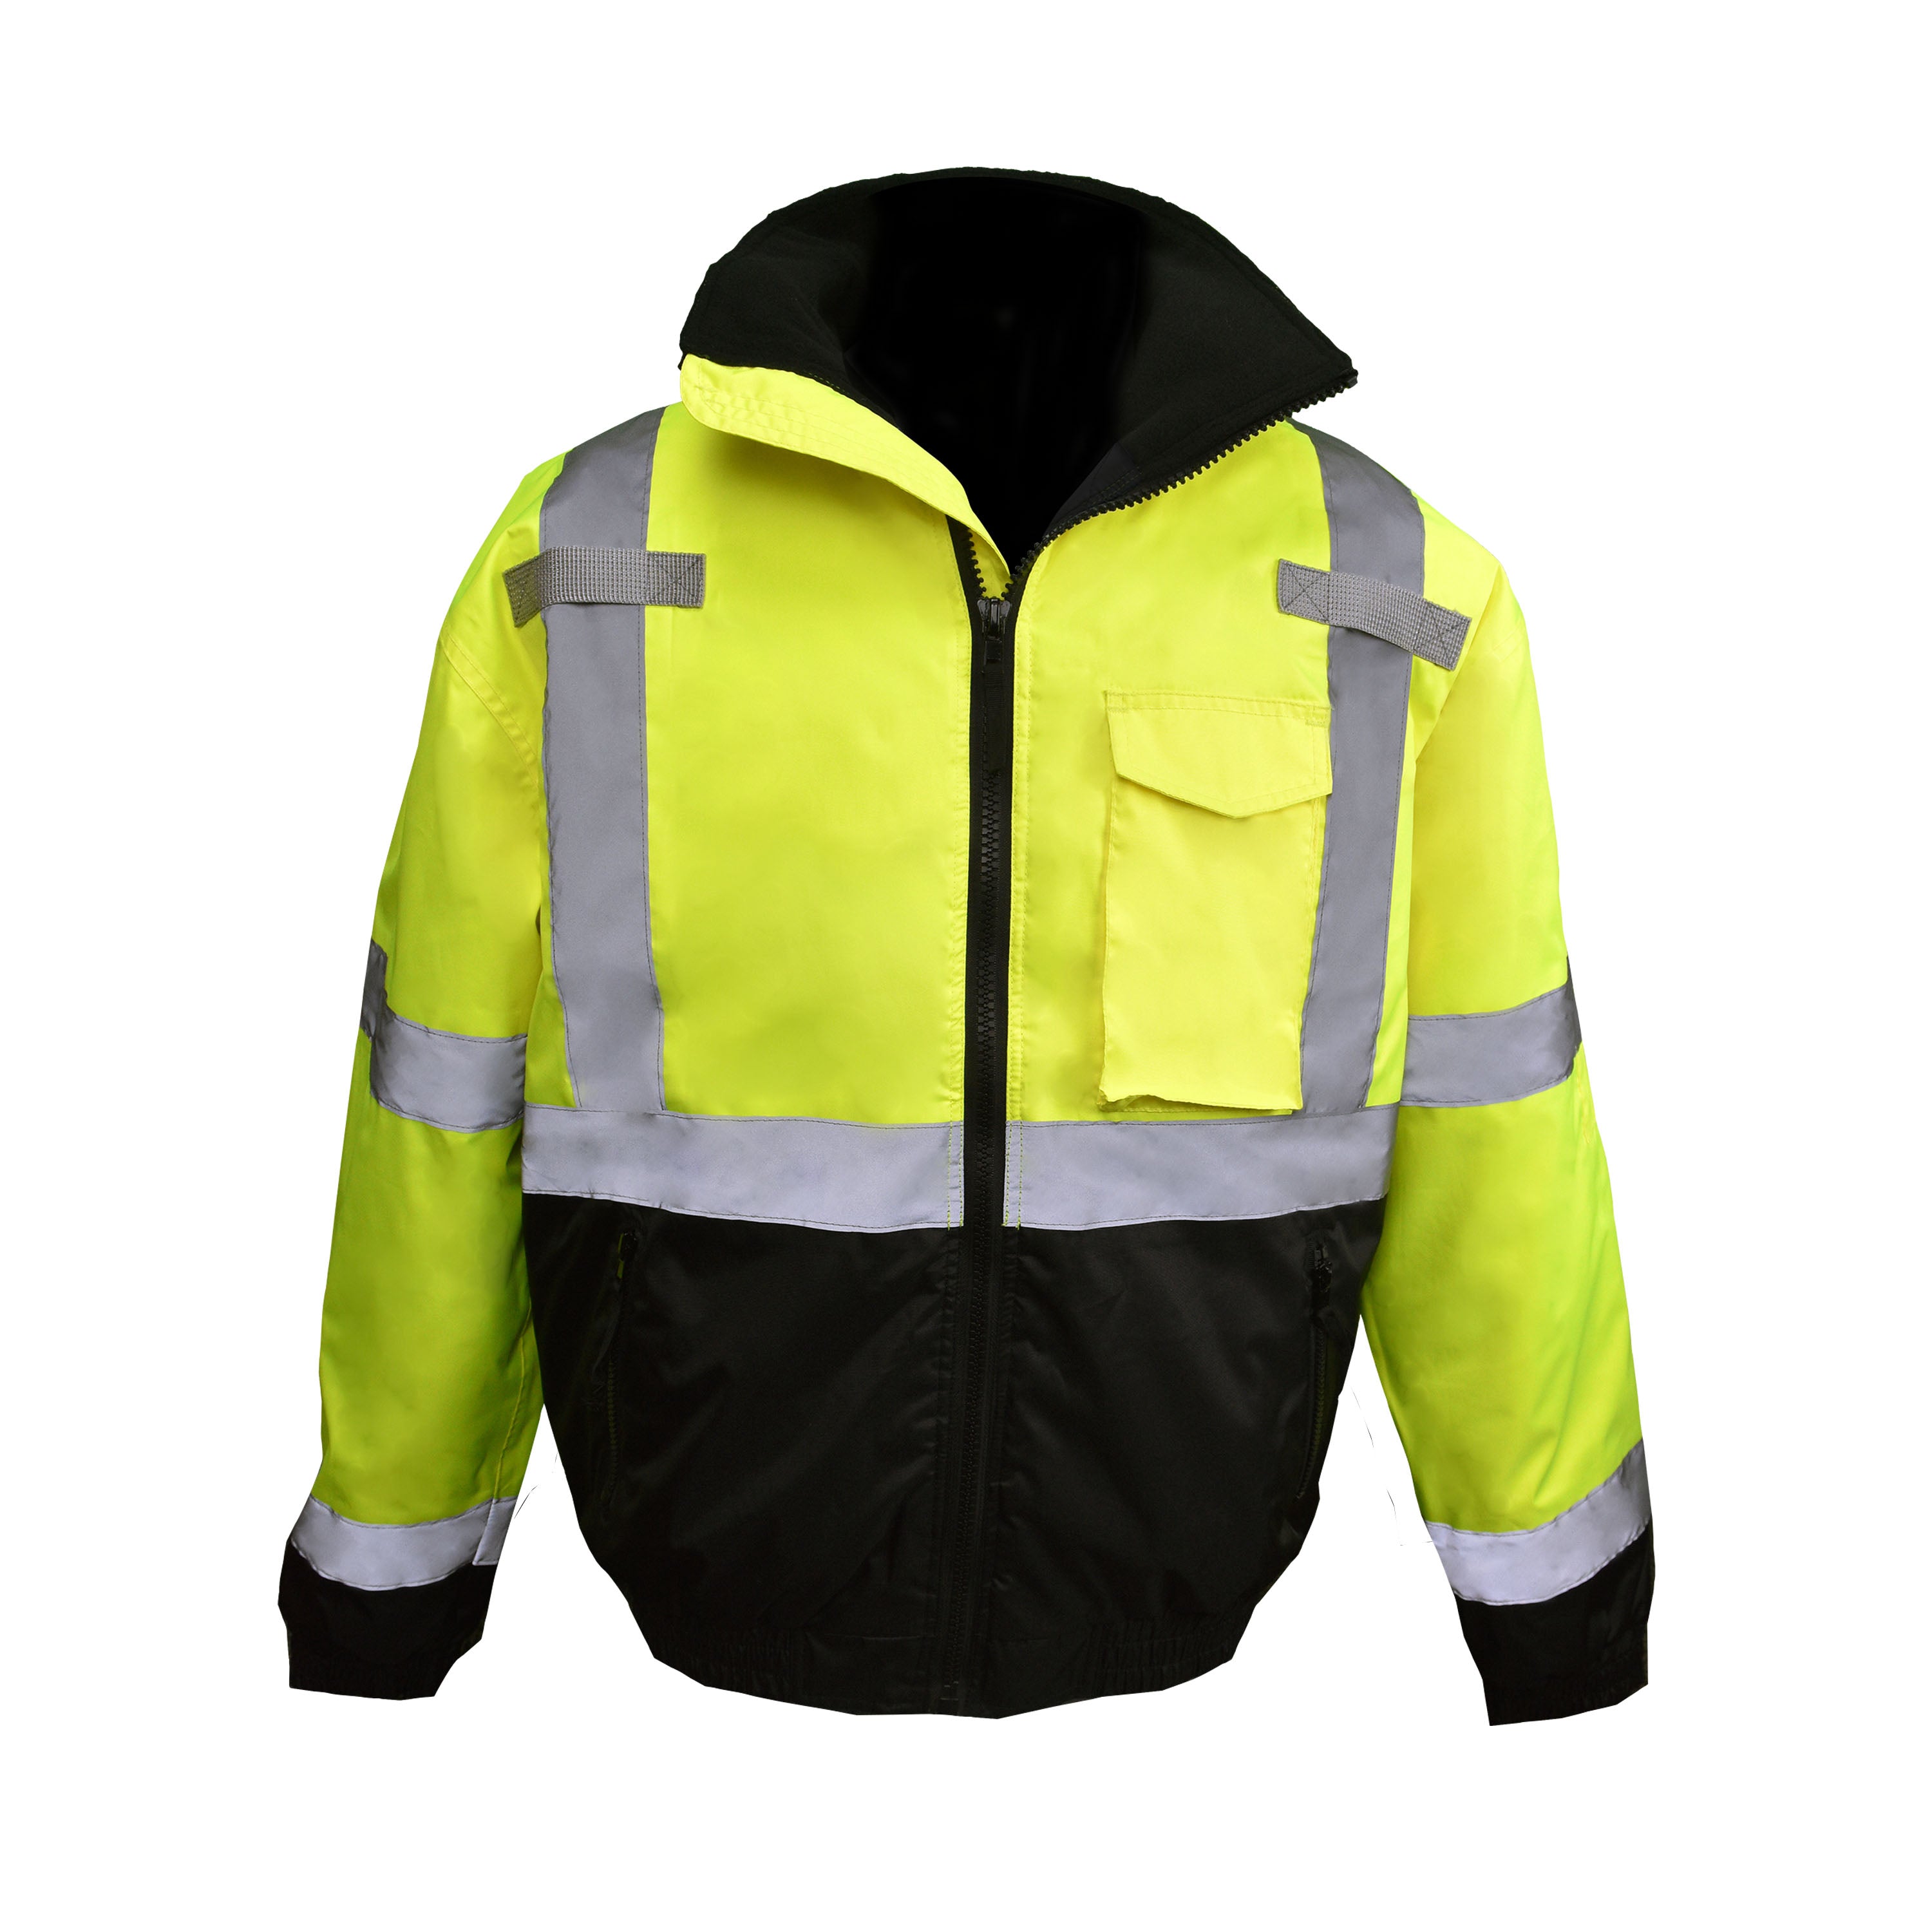 Radians SJ11QB Class3 High Visibility Weatherproof Bomber Jacket with Quilted Built-in Liner-eSafety Supplies, Inc